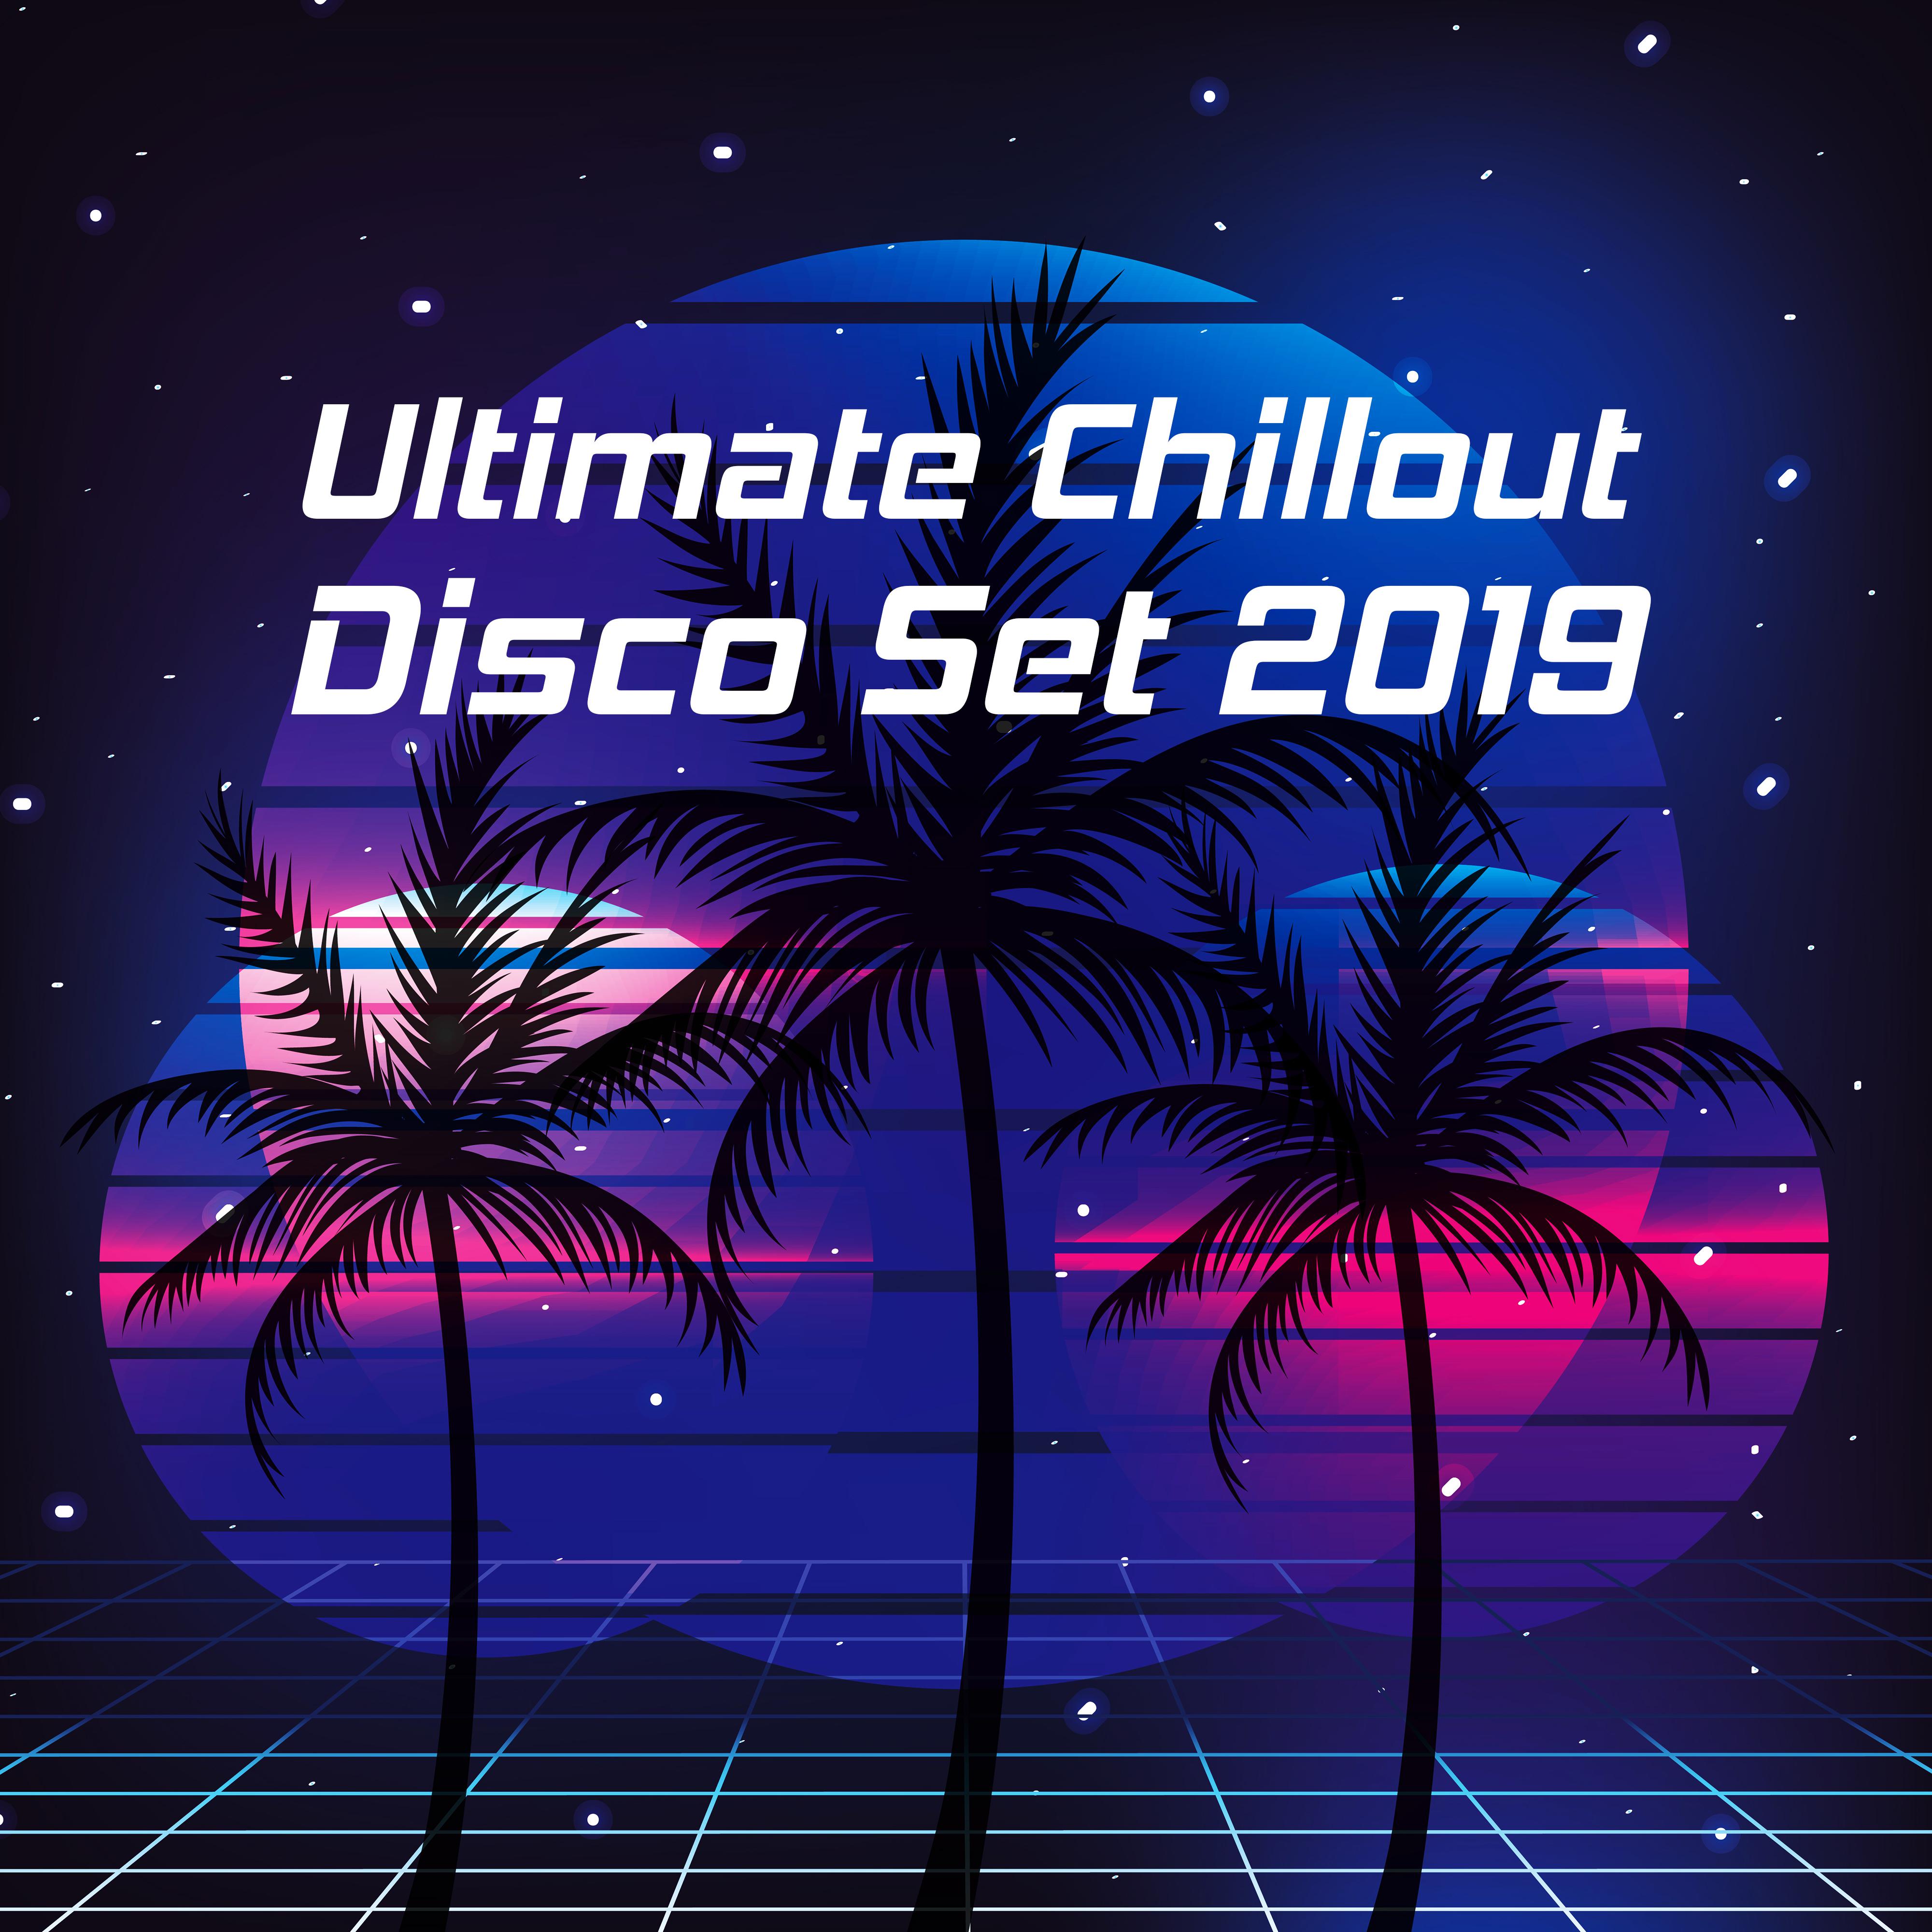 Ultimate Chillout Disco Set 2019